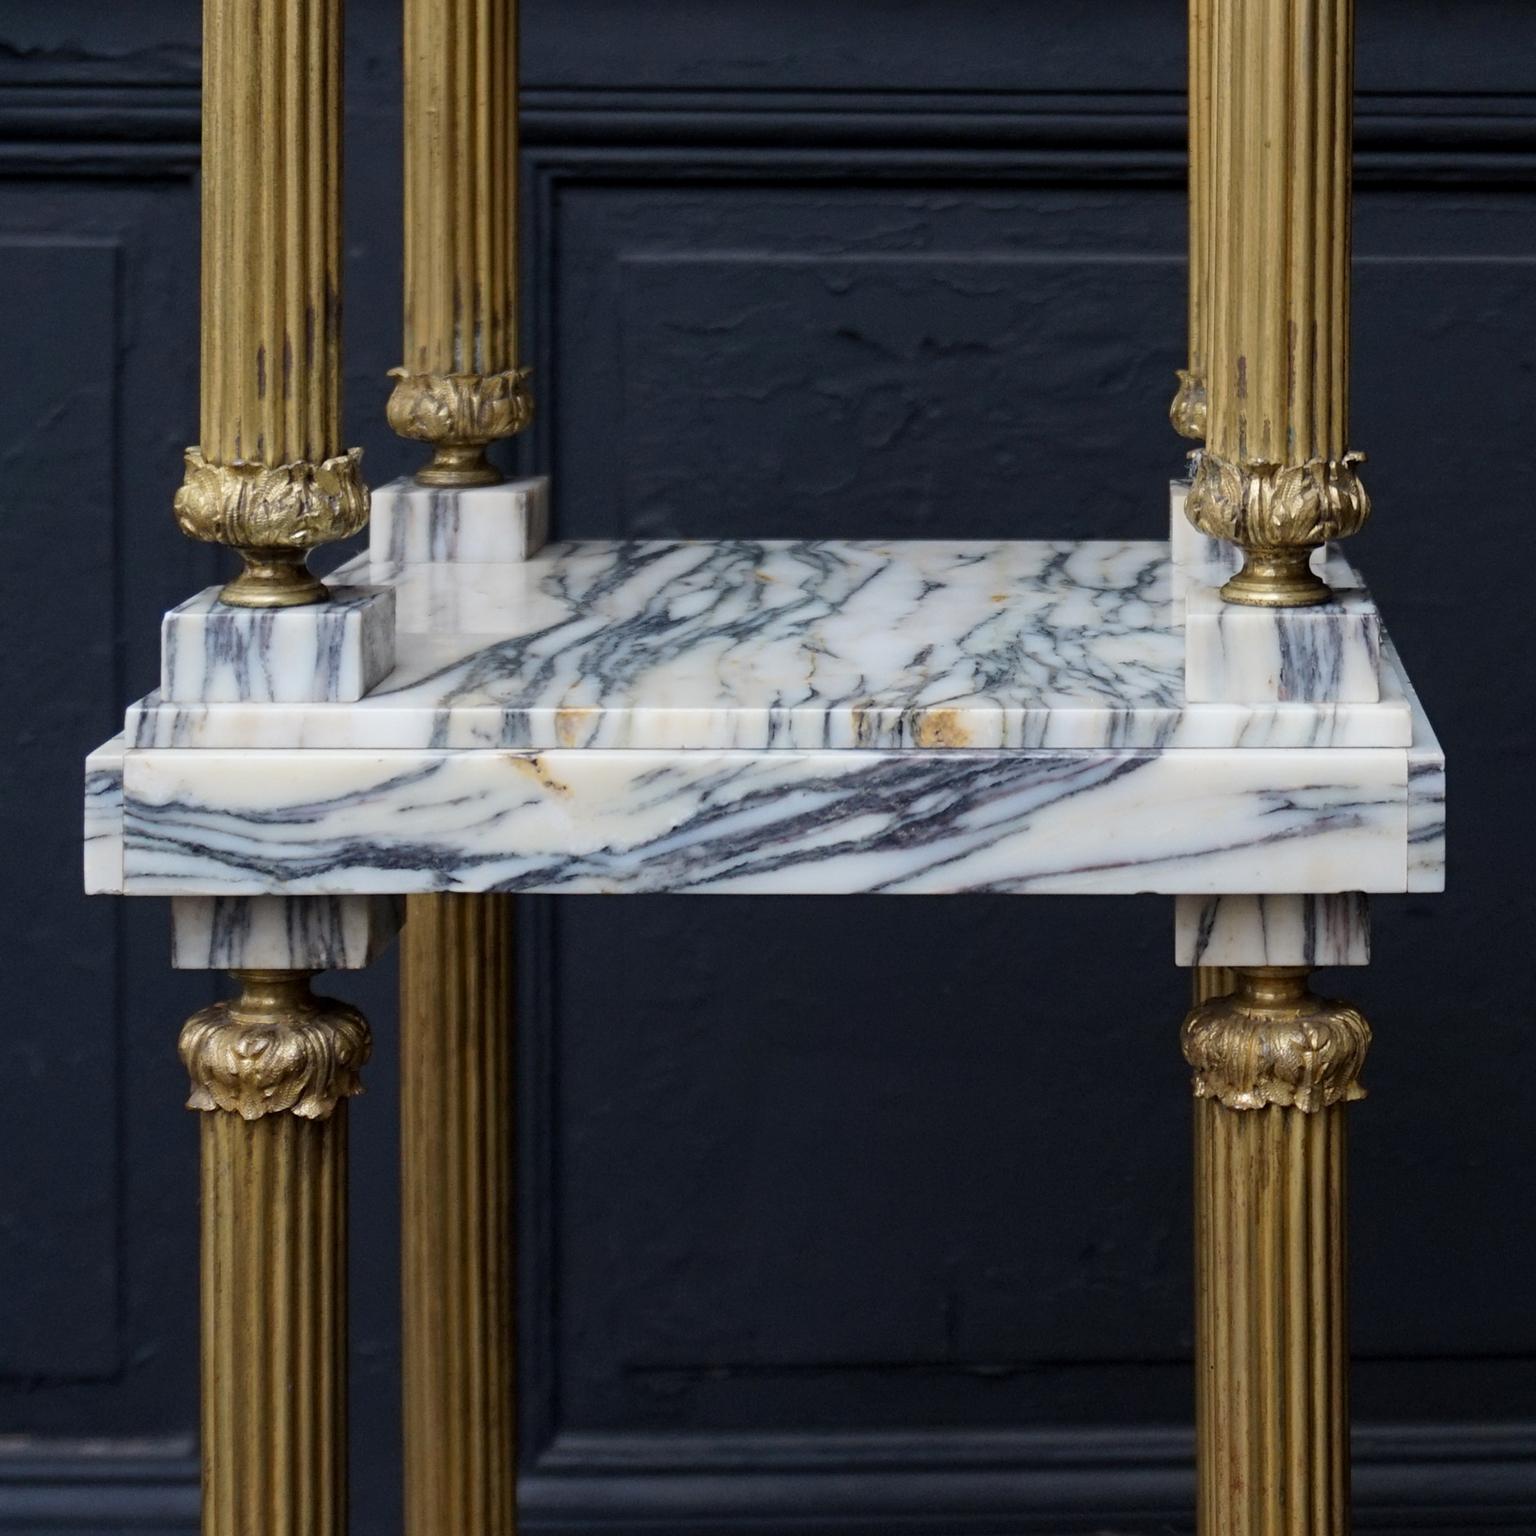 20th Century Midcentury Neoclassical Marble and Gilt Brass Three-Tier Étagère Shelf Stand